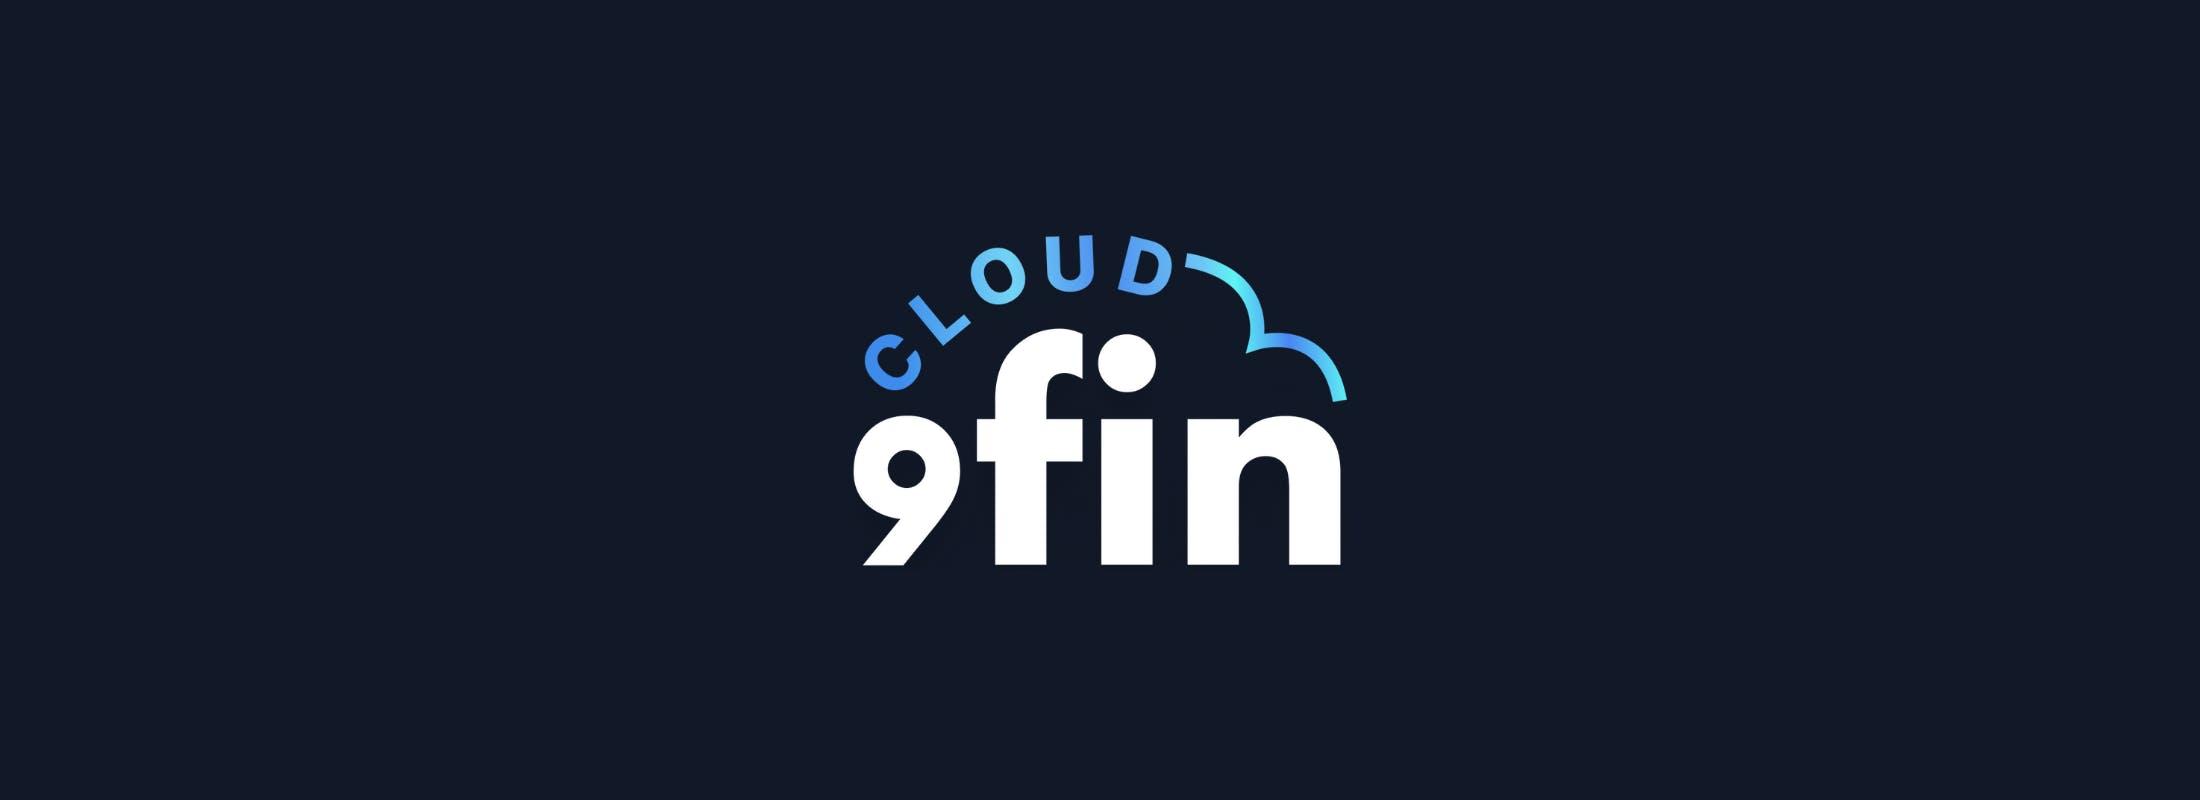 Cloud 9fin — Managing messaging with Jude Gorman of Collected Strategies